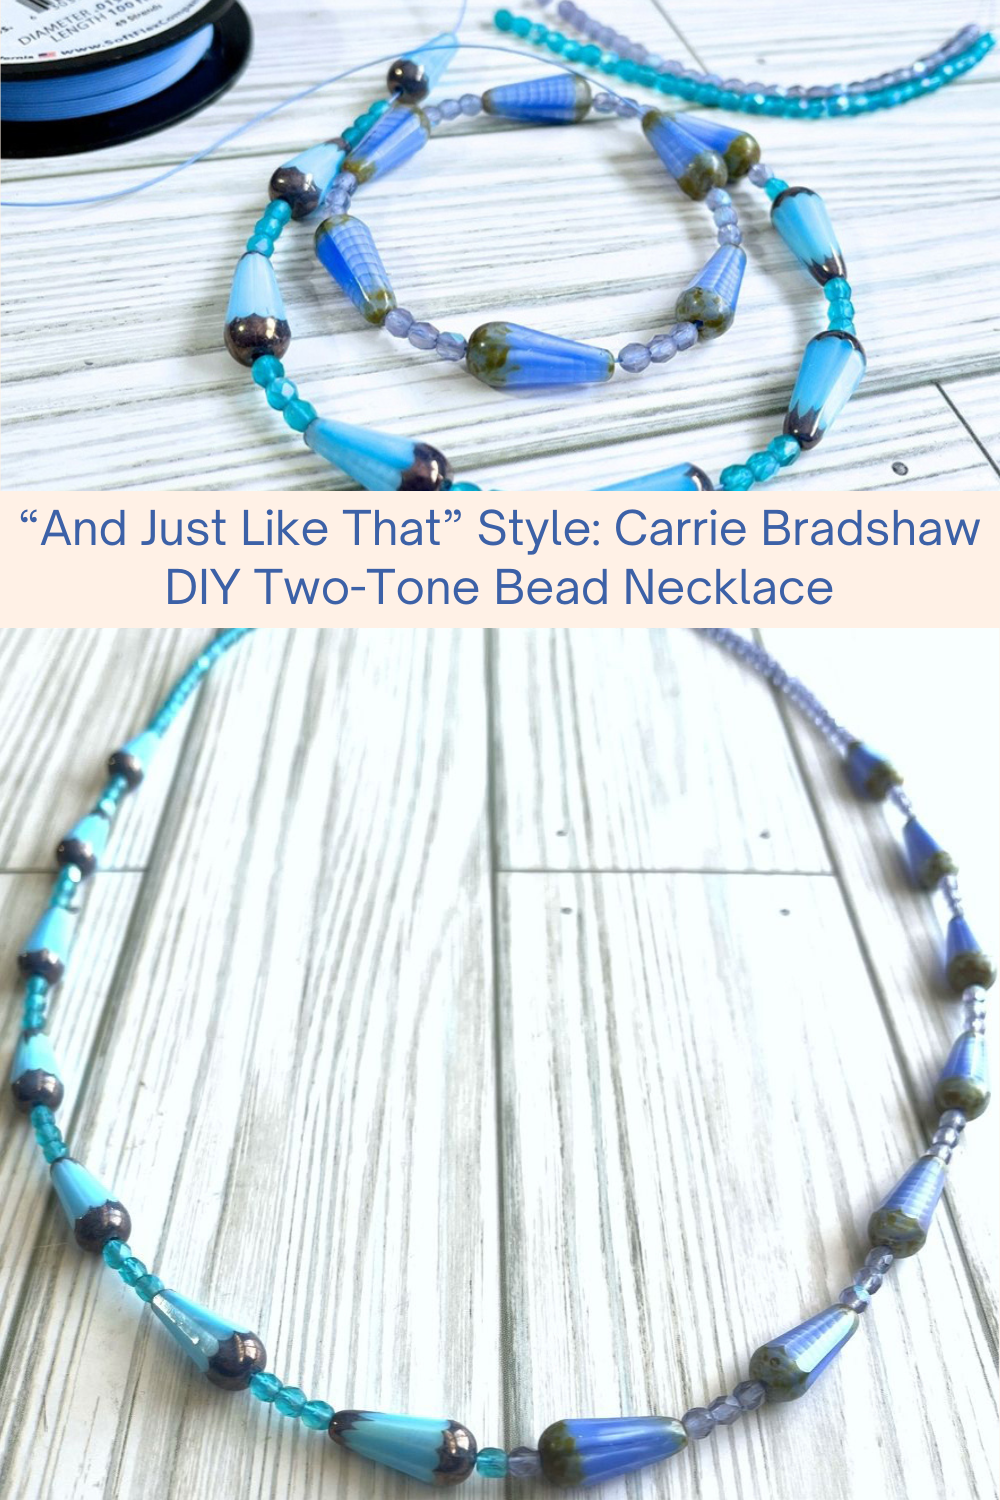 And Just Like That Style Carrie Bradshaw DIY Two-Tone Bead Necklace Collage